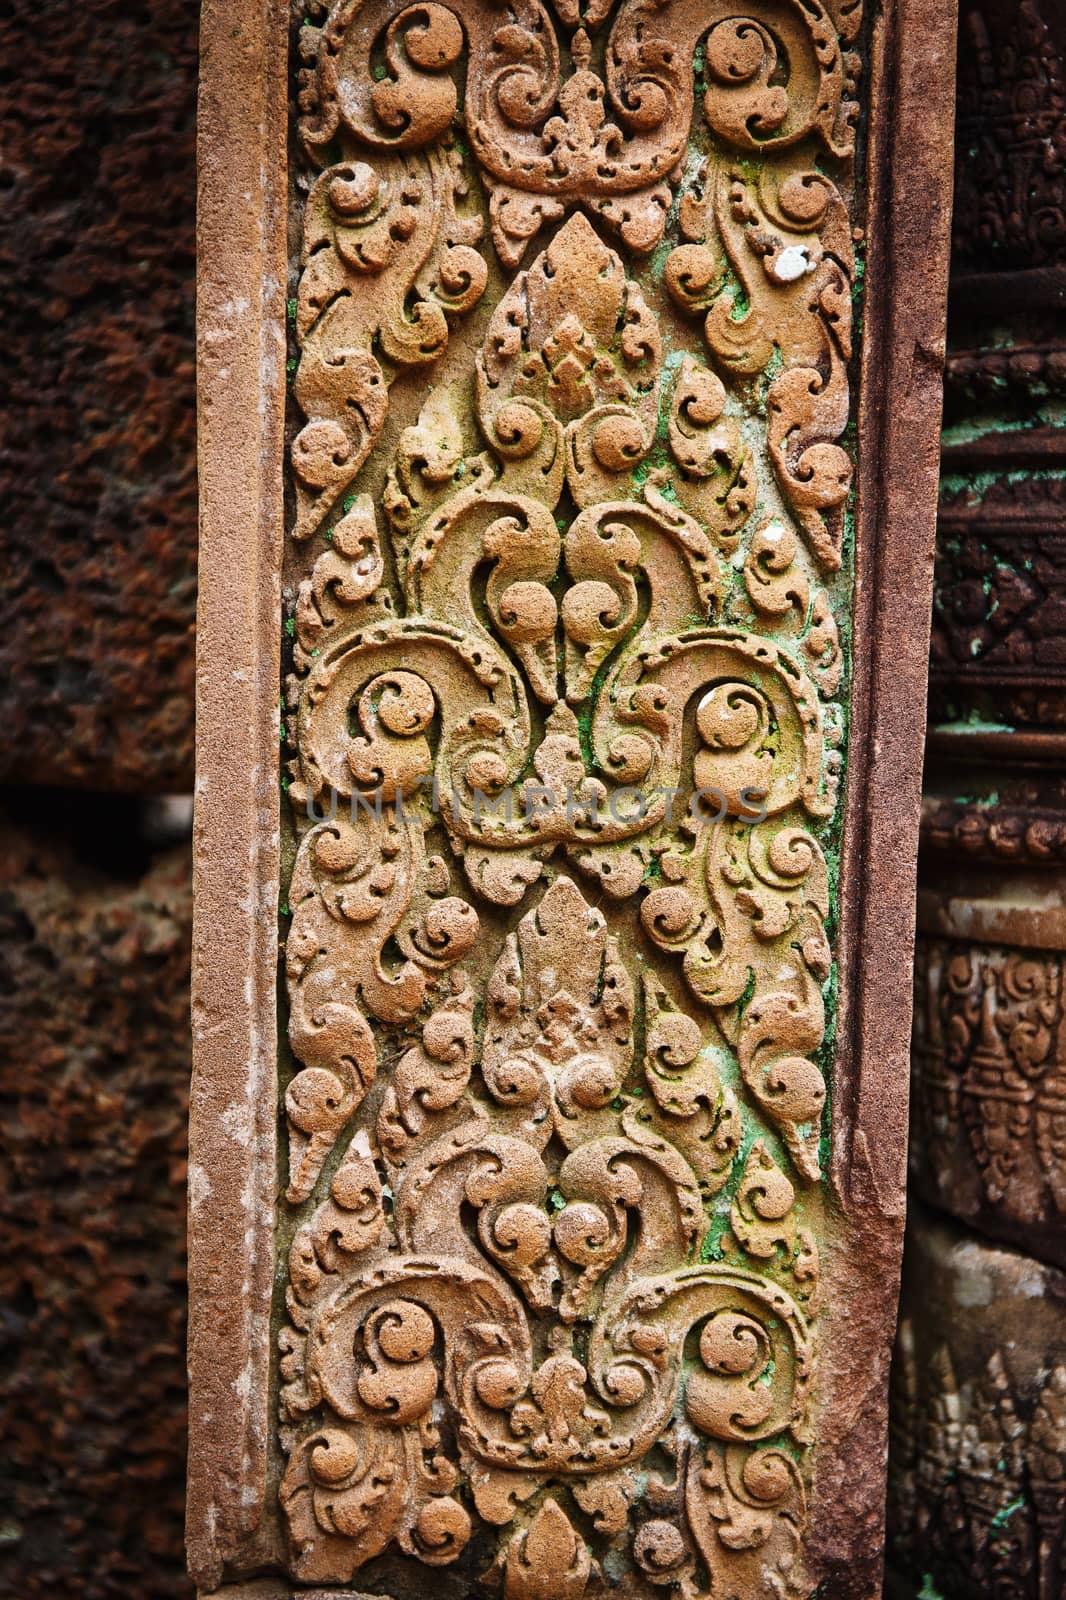 Bas relief in Banteay Srei, Cambodia by gorov108